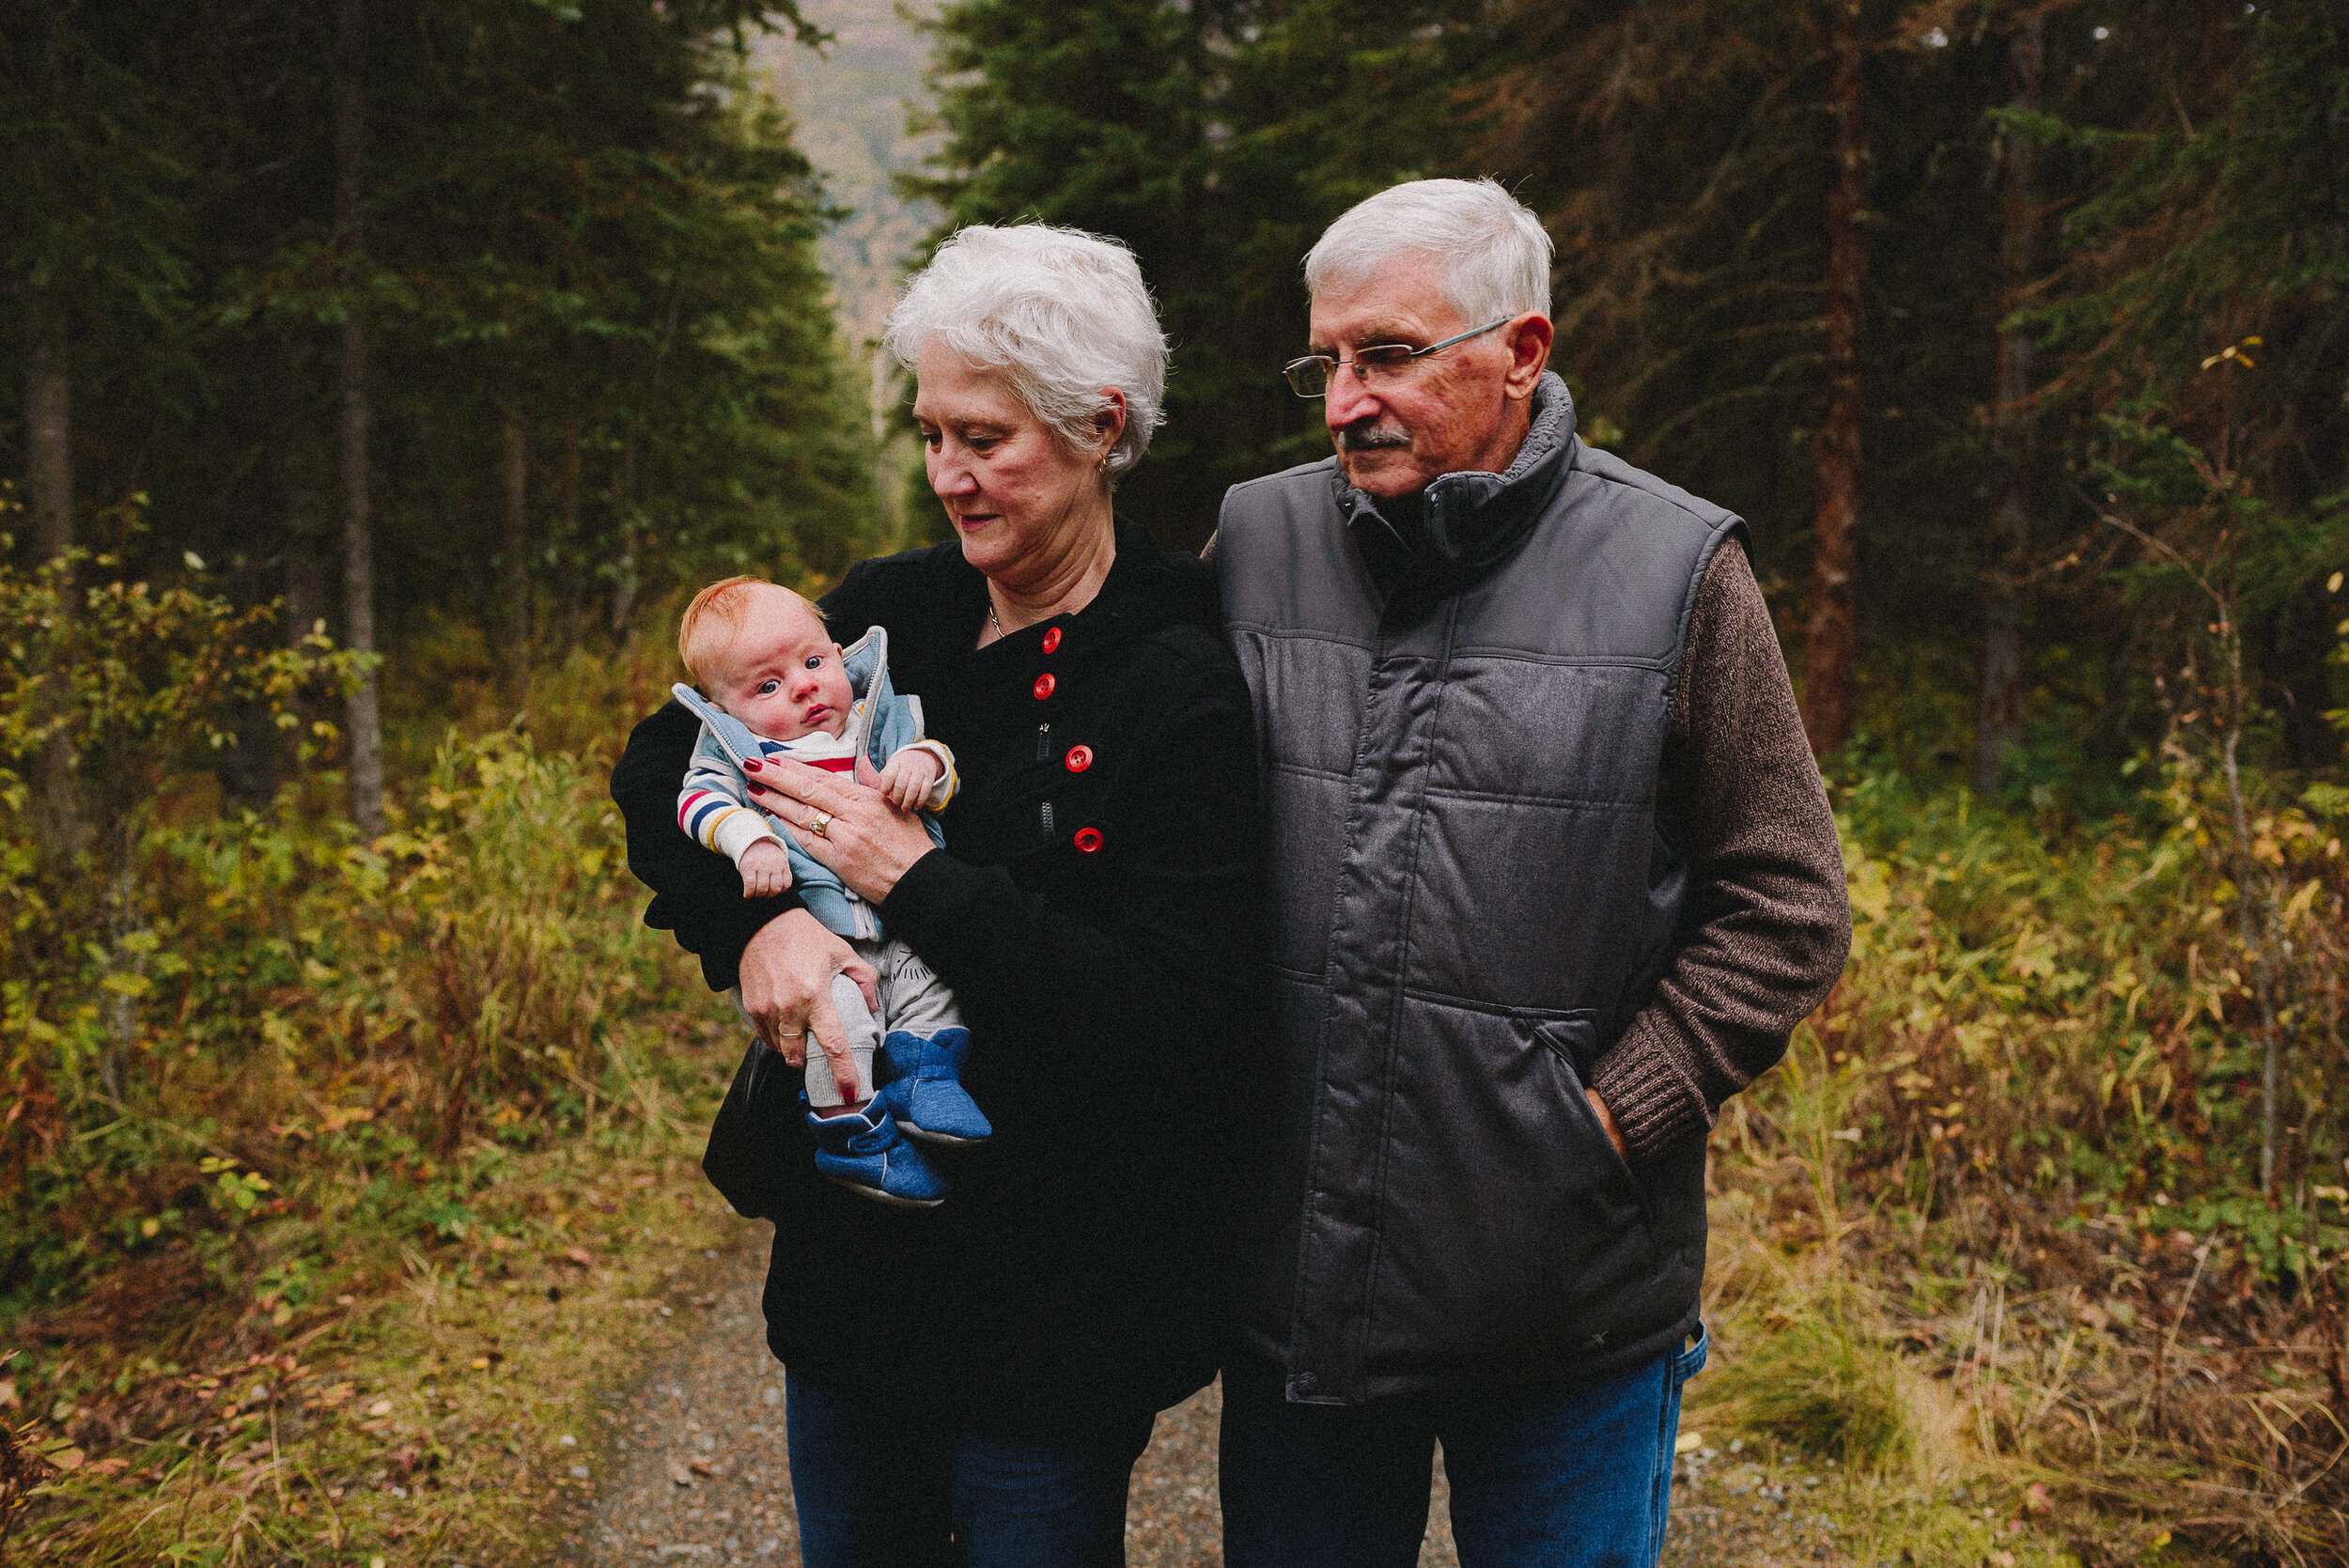 north-fork-eagle-river-fall-family-session-alaska-photographer-way-up-north-photography (133).jpg